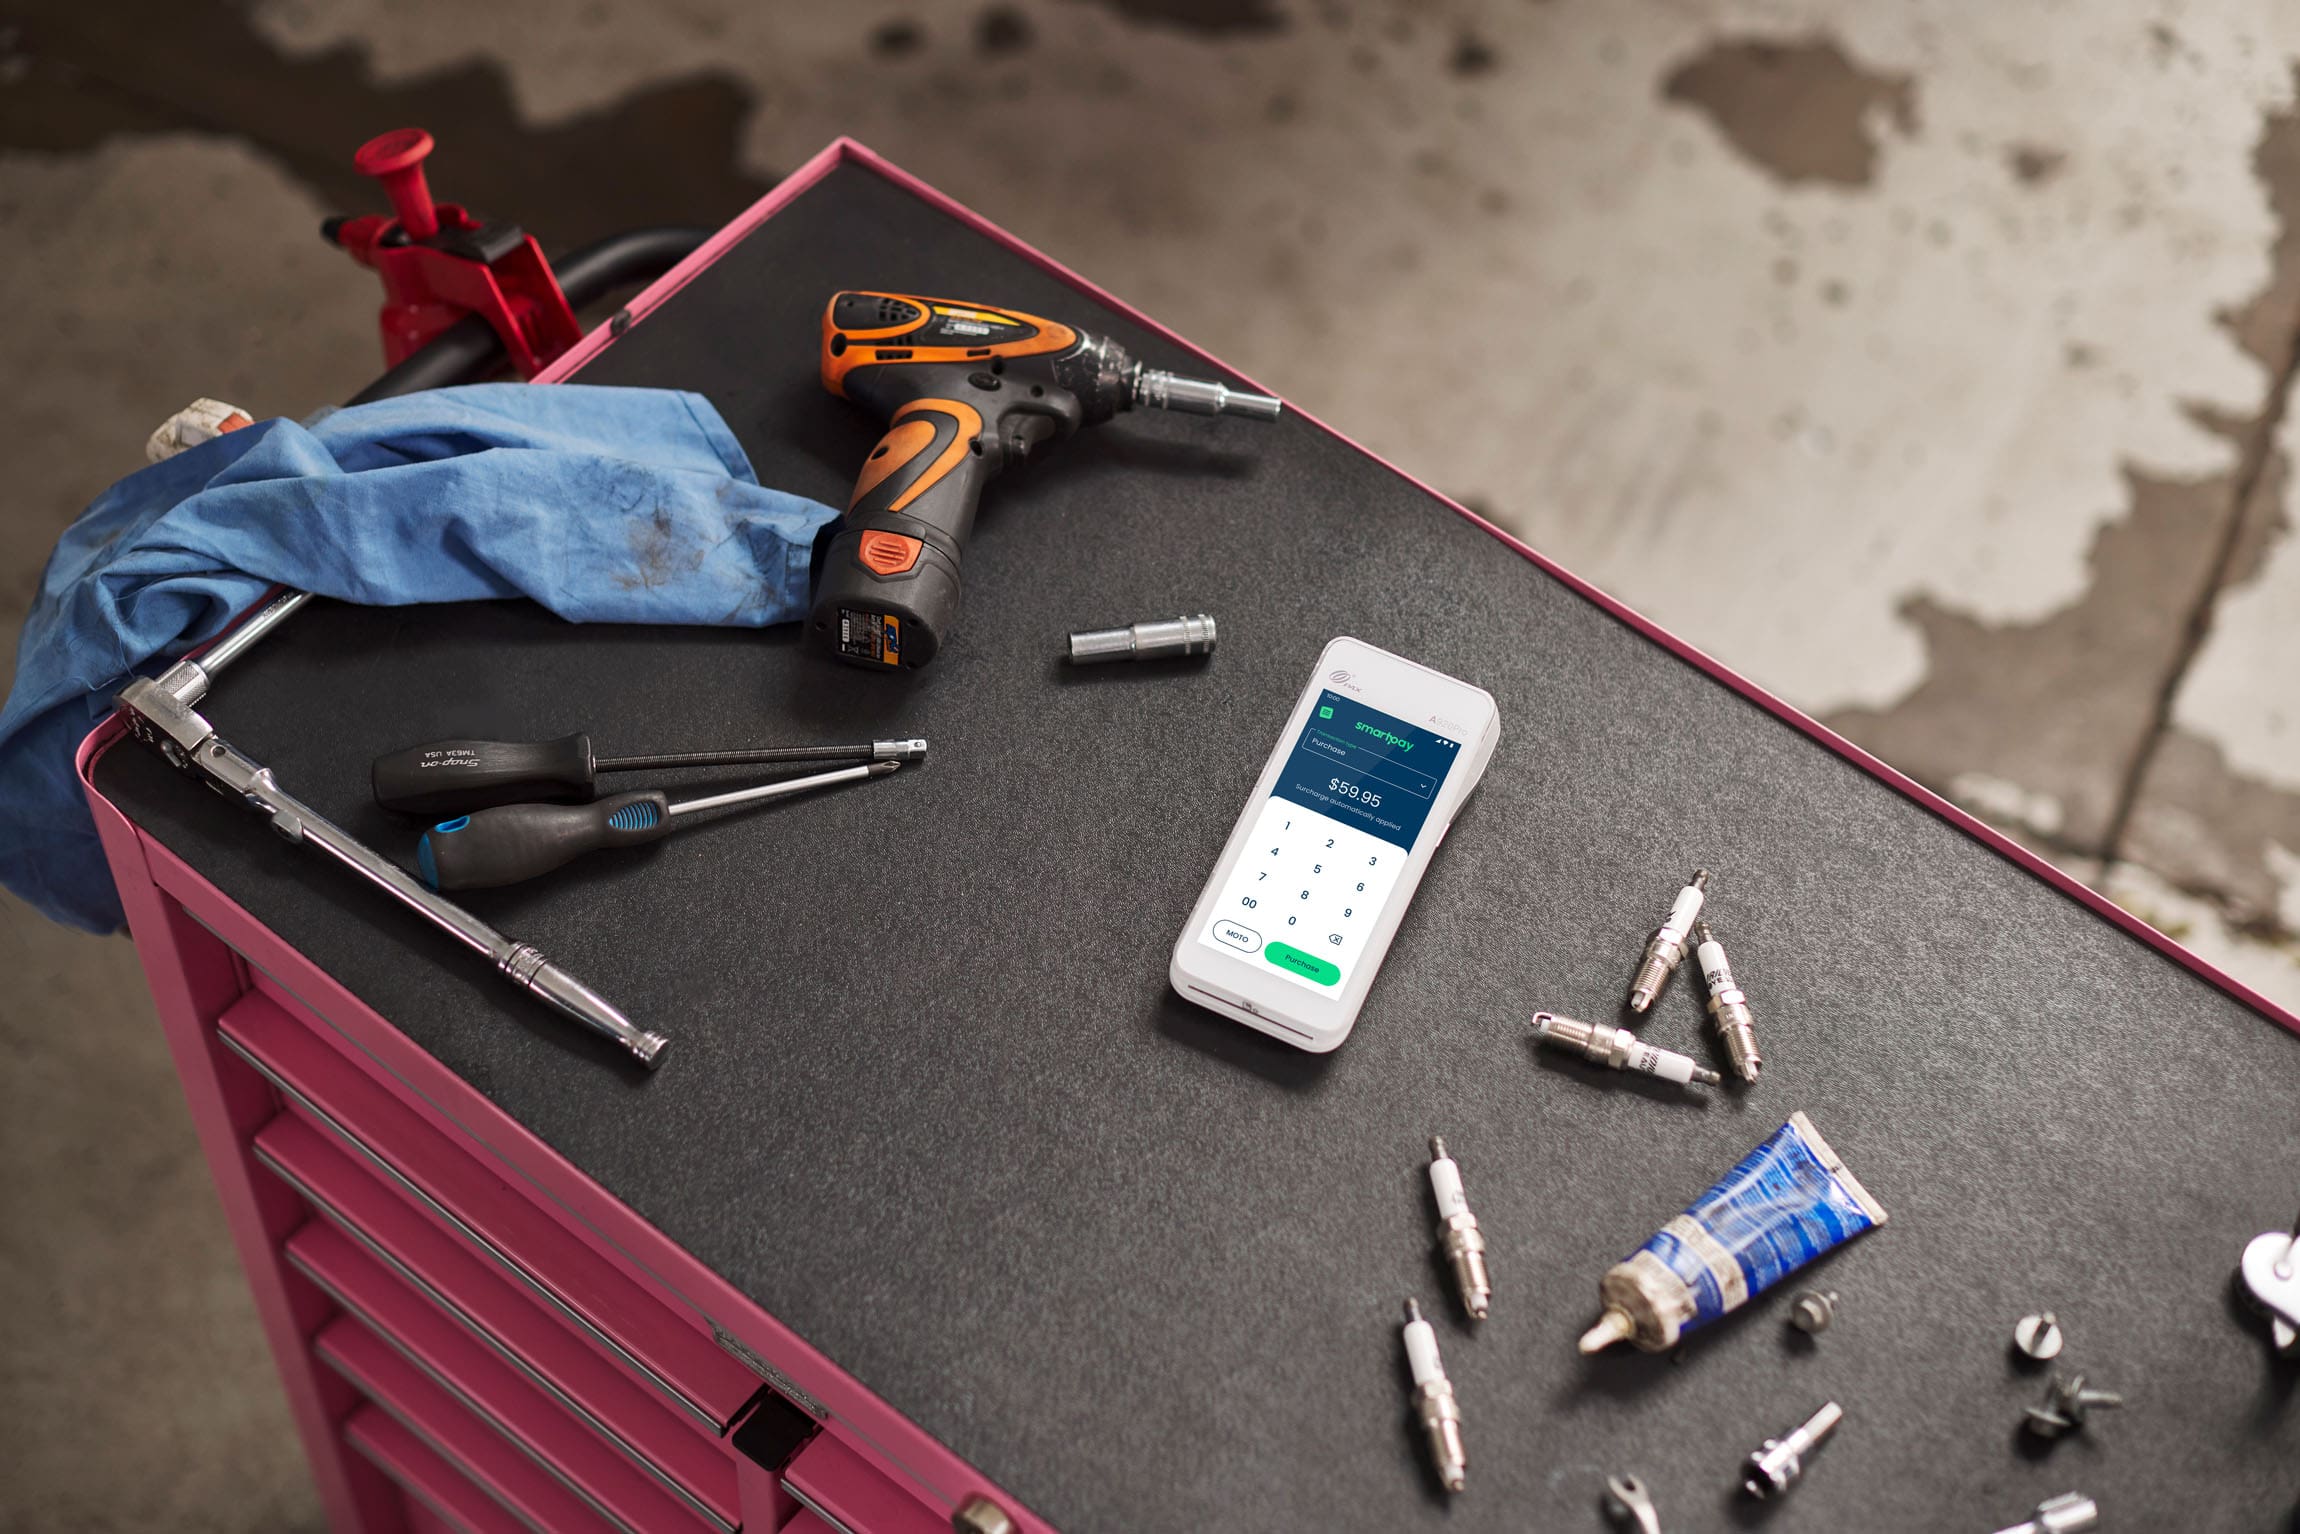 Smartpay Android terminal sitting on tool bench surrounded by mechanic accessories